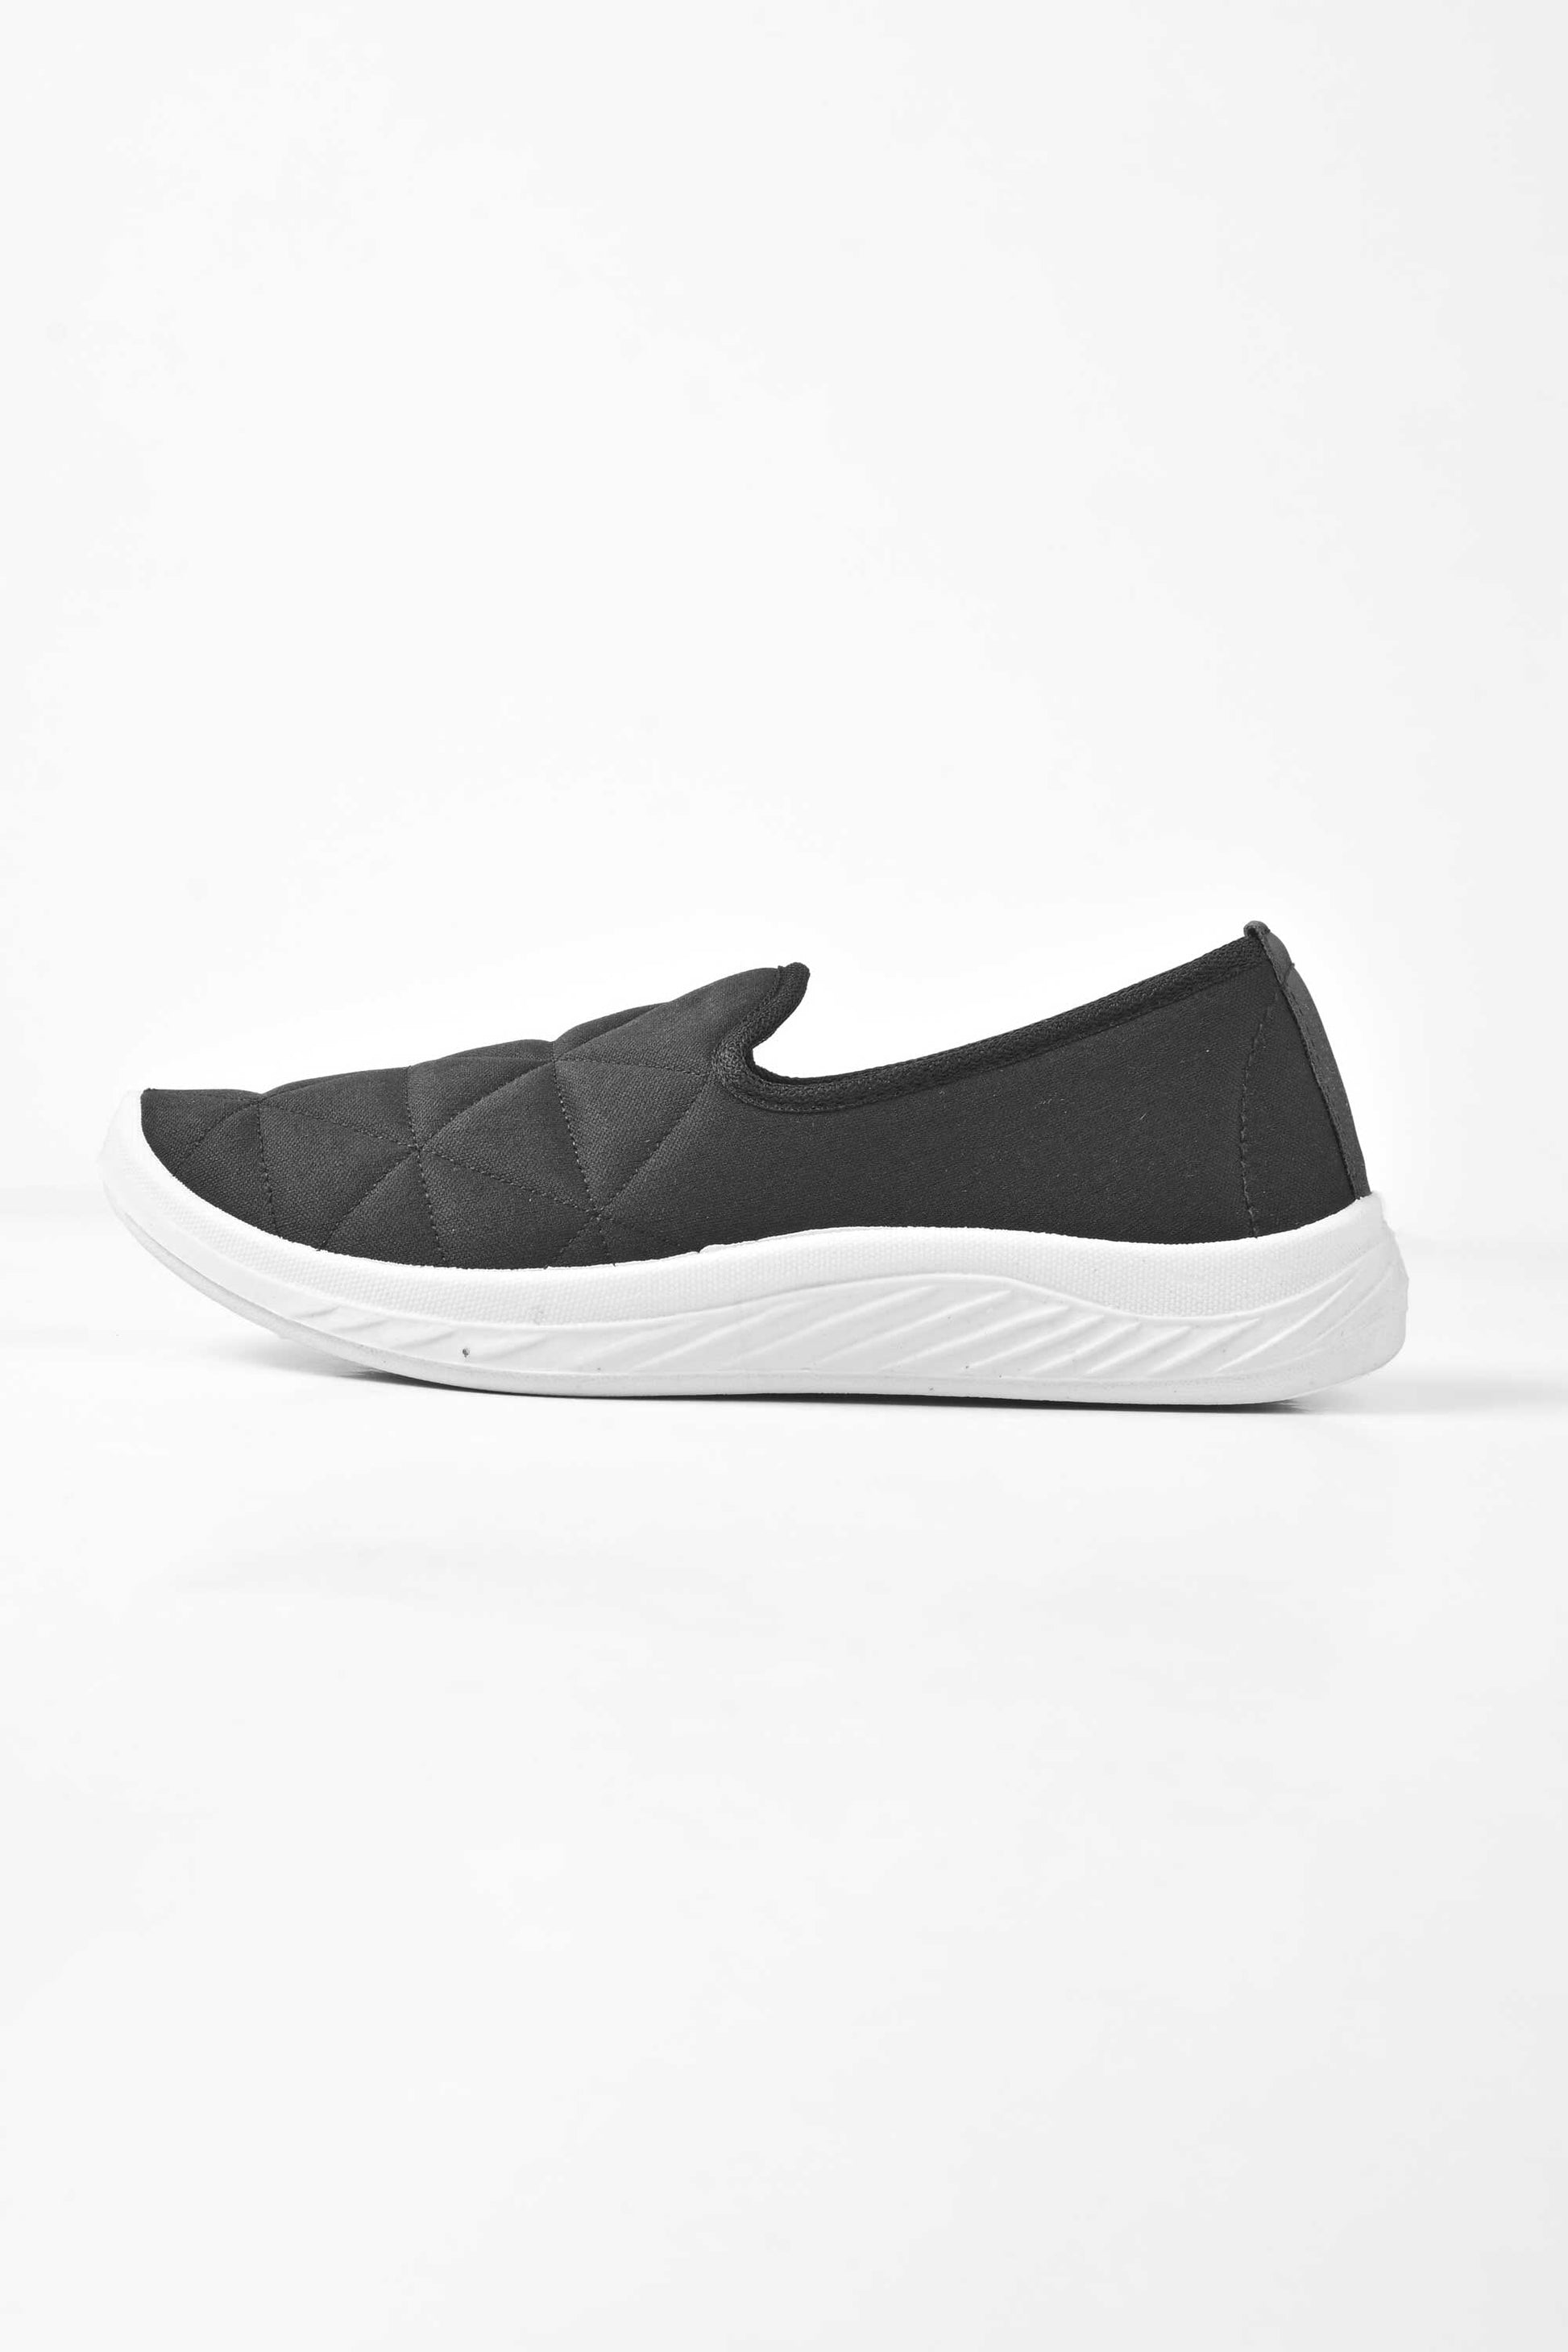 Dadson Women's Premium Quilted Slip On Sneakers Women's Shoes RAM 